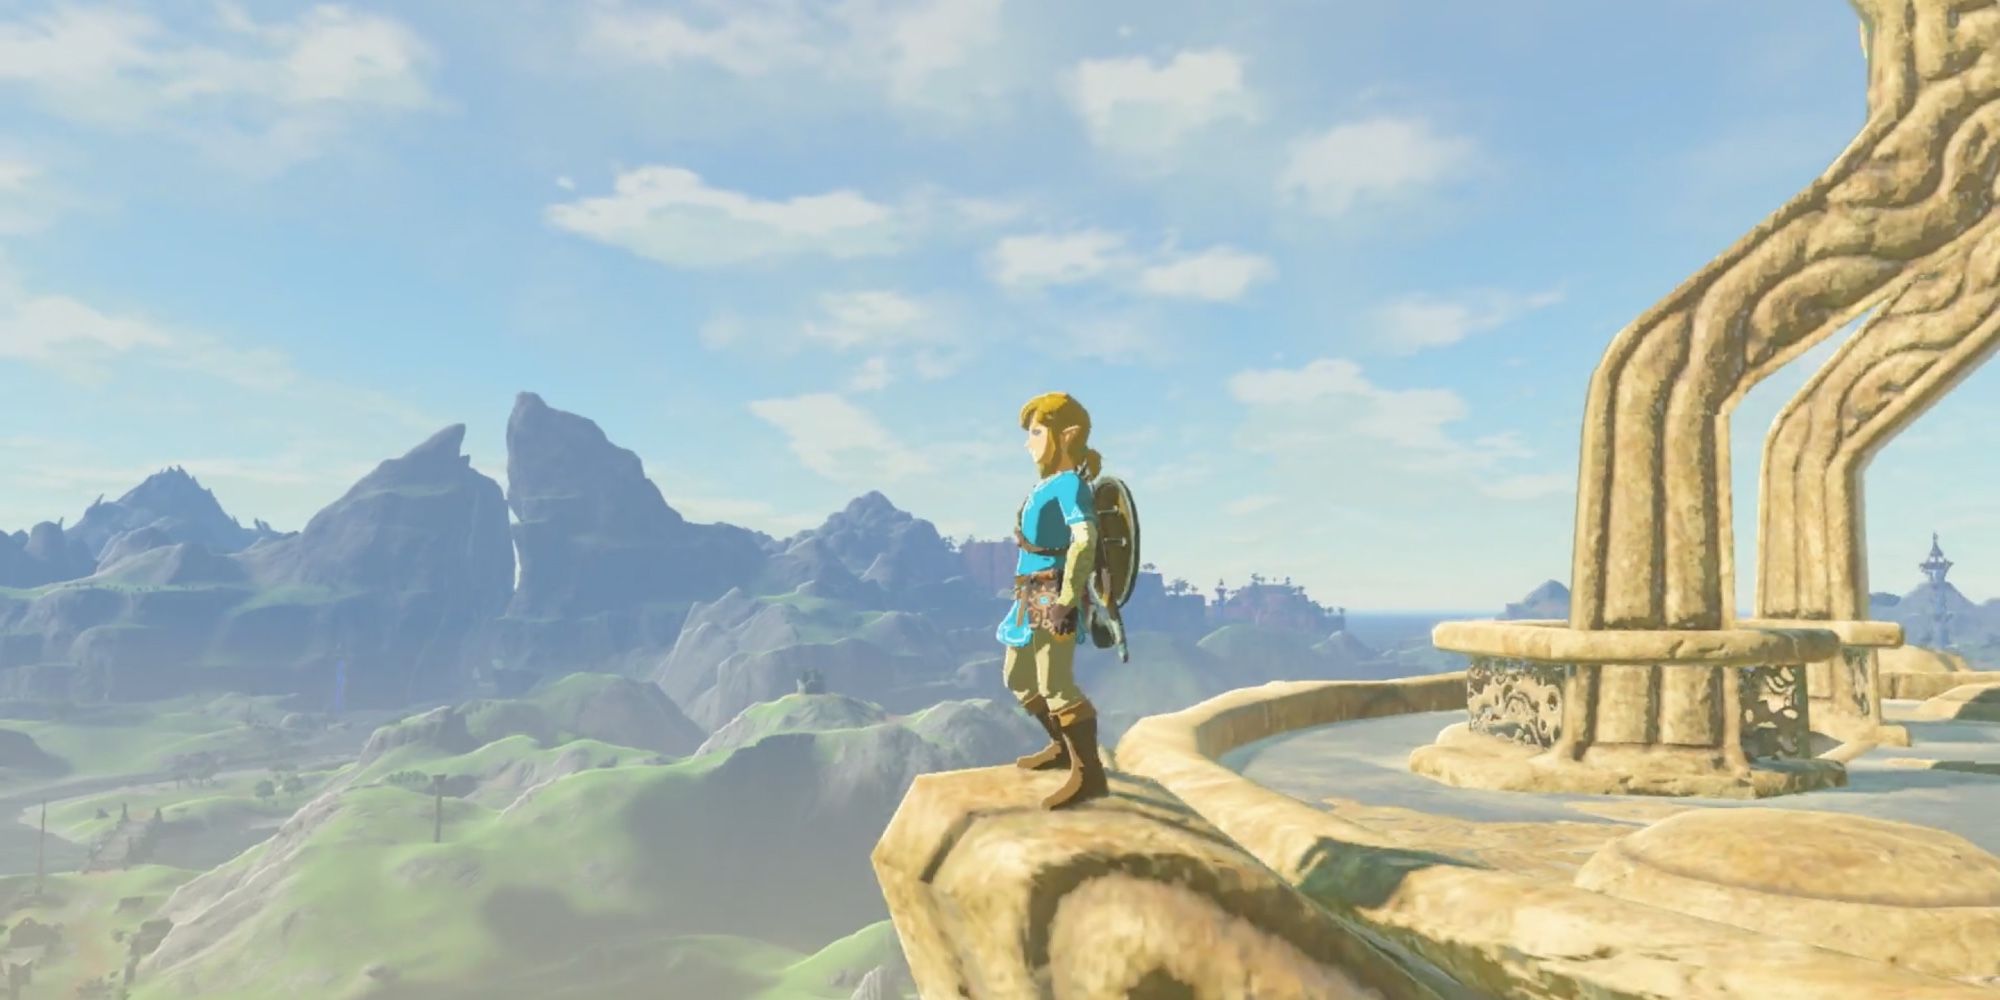 Best Years in Gaming - 2017 - The Legend of Zelda - Breath of the Wild - Link looks forward for an adventure